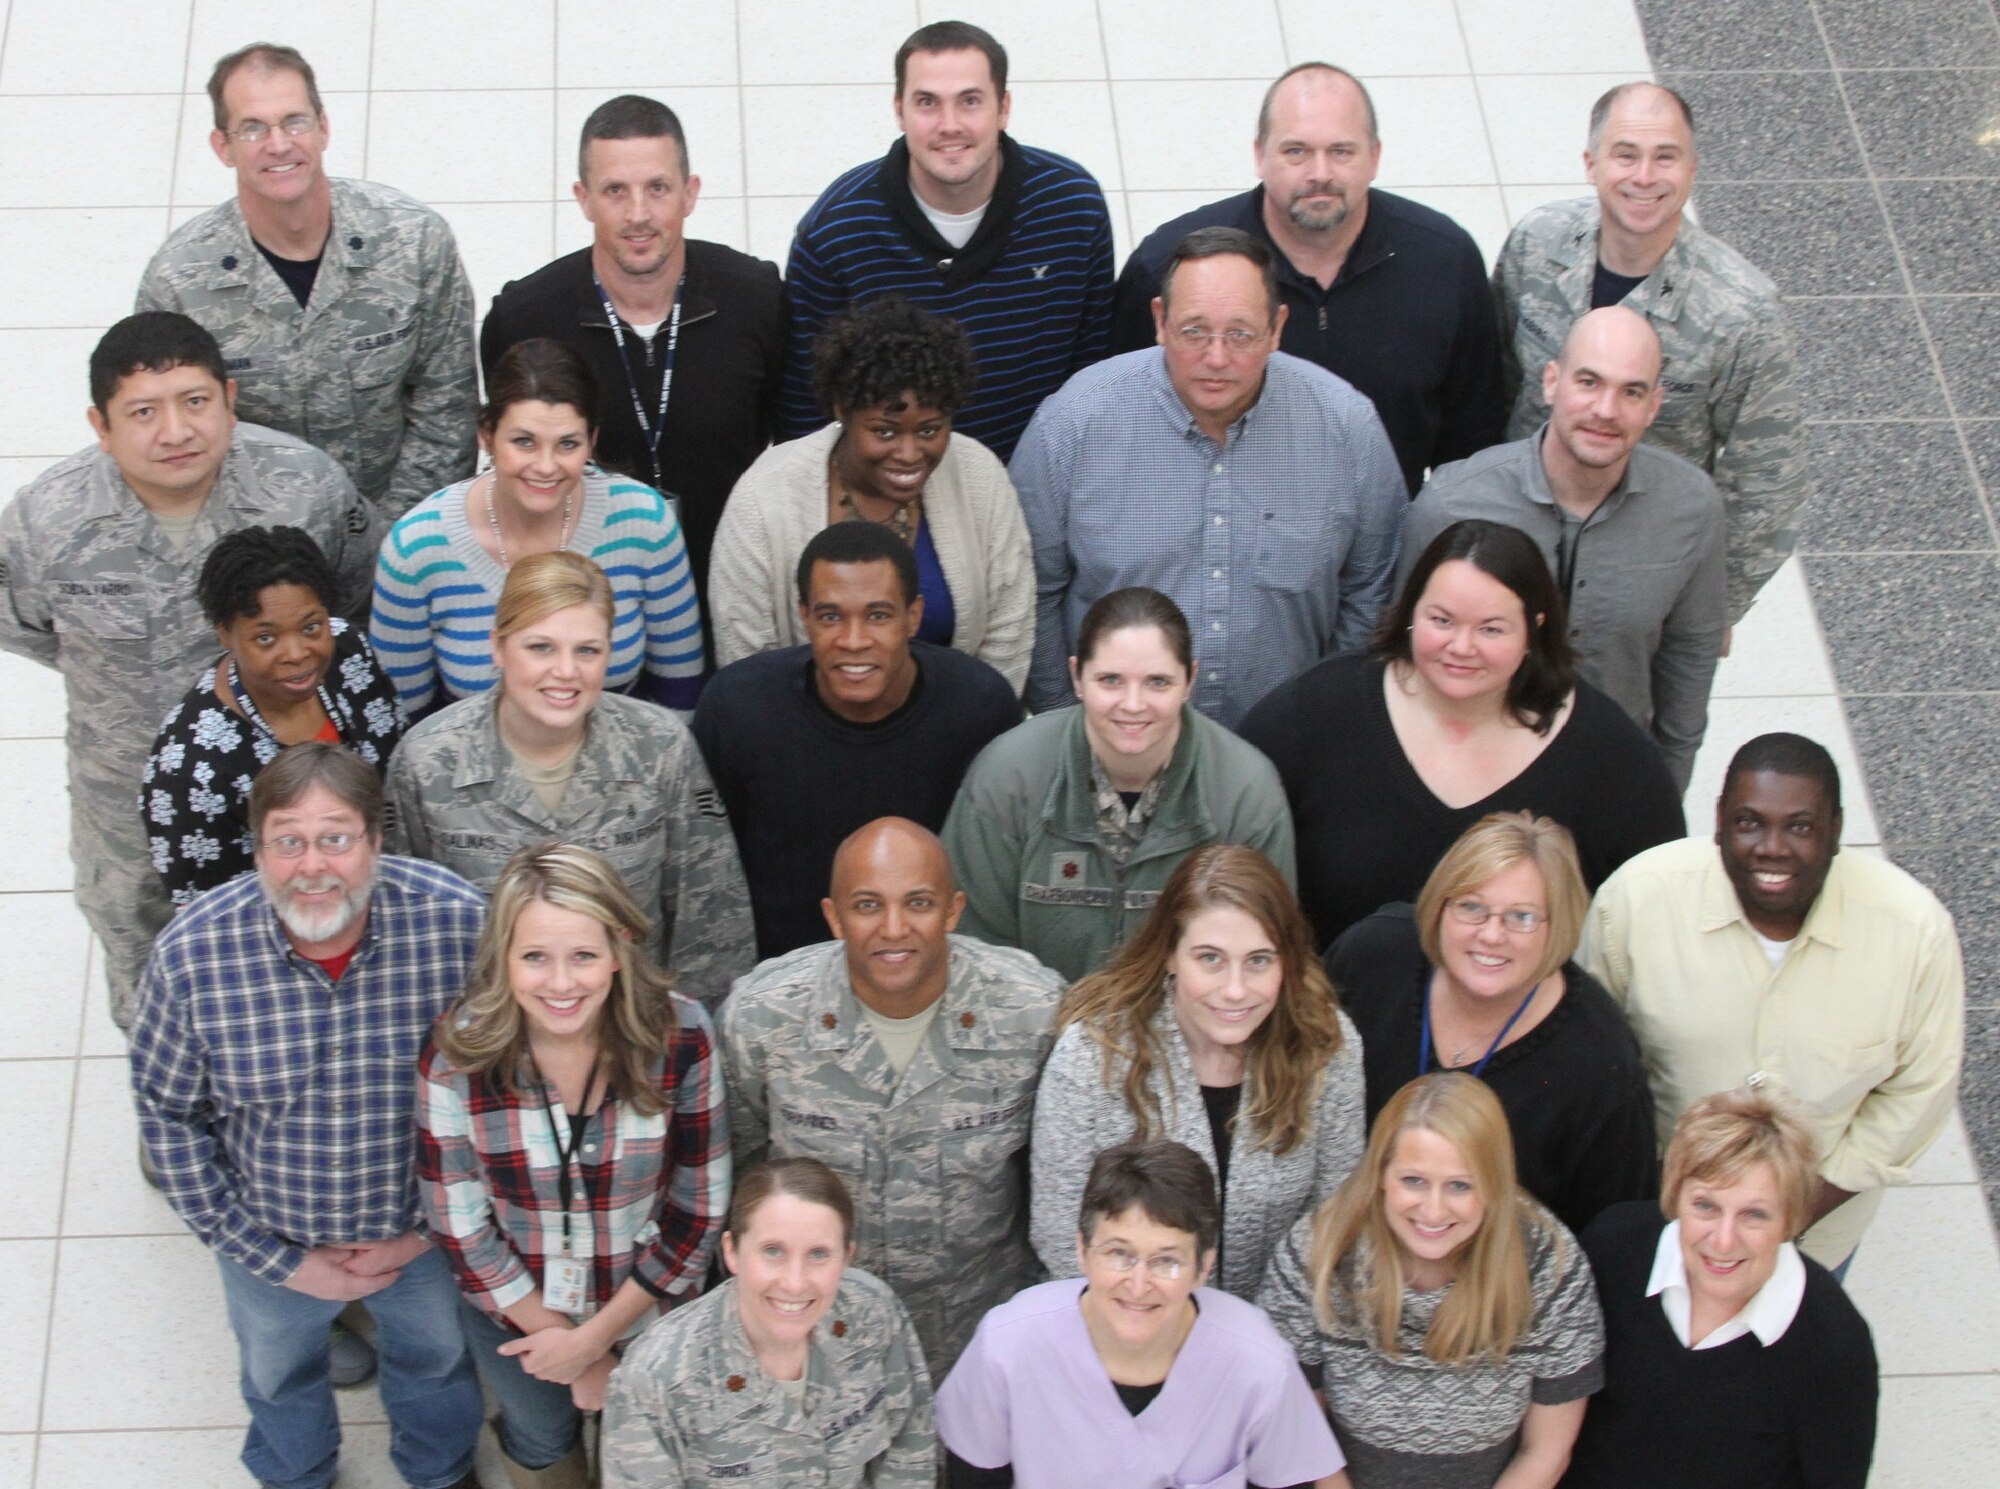 Members of the Flu Team, from both the Epidemiology Consult Service and the Epidemiology Laboratory, part of the DoD USAFSAM Global, Laboratory-based Influenza Surveillance Program. (Contributed photo)